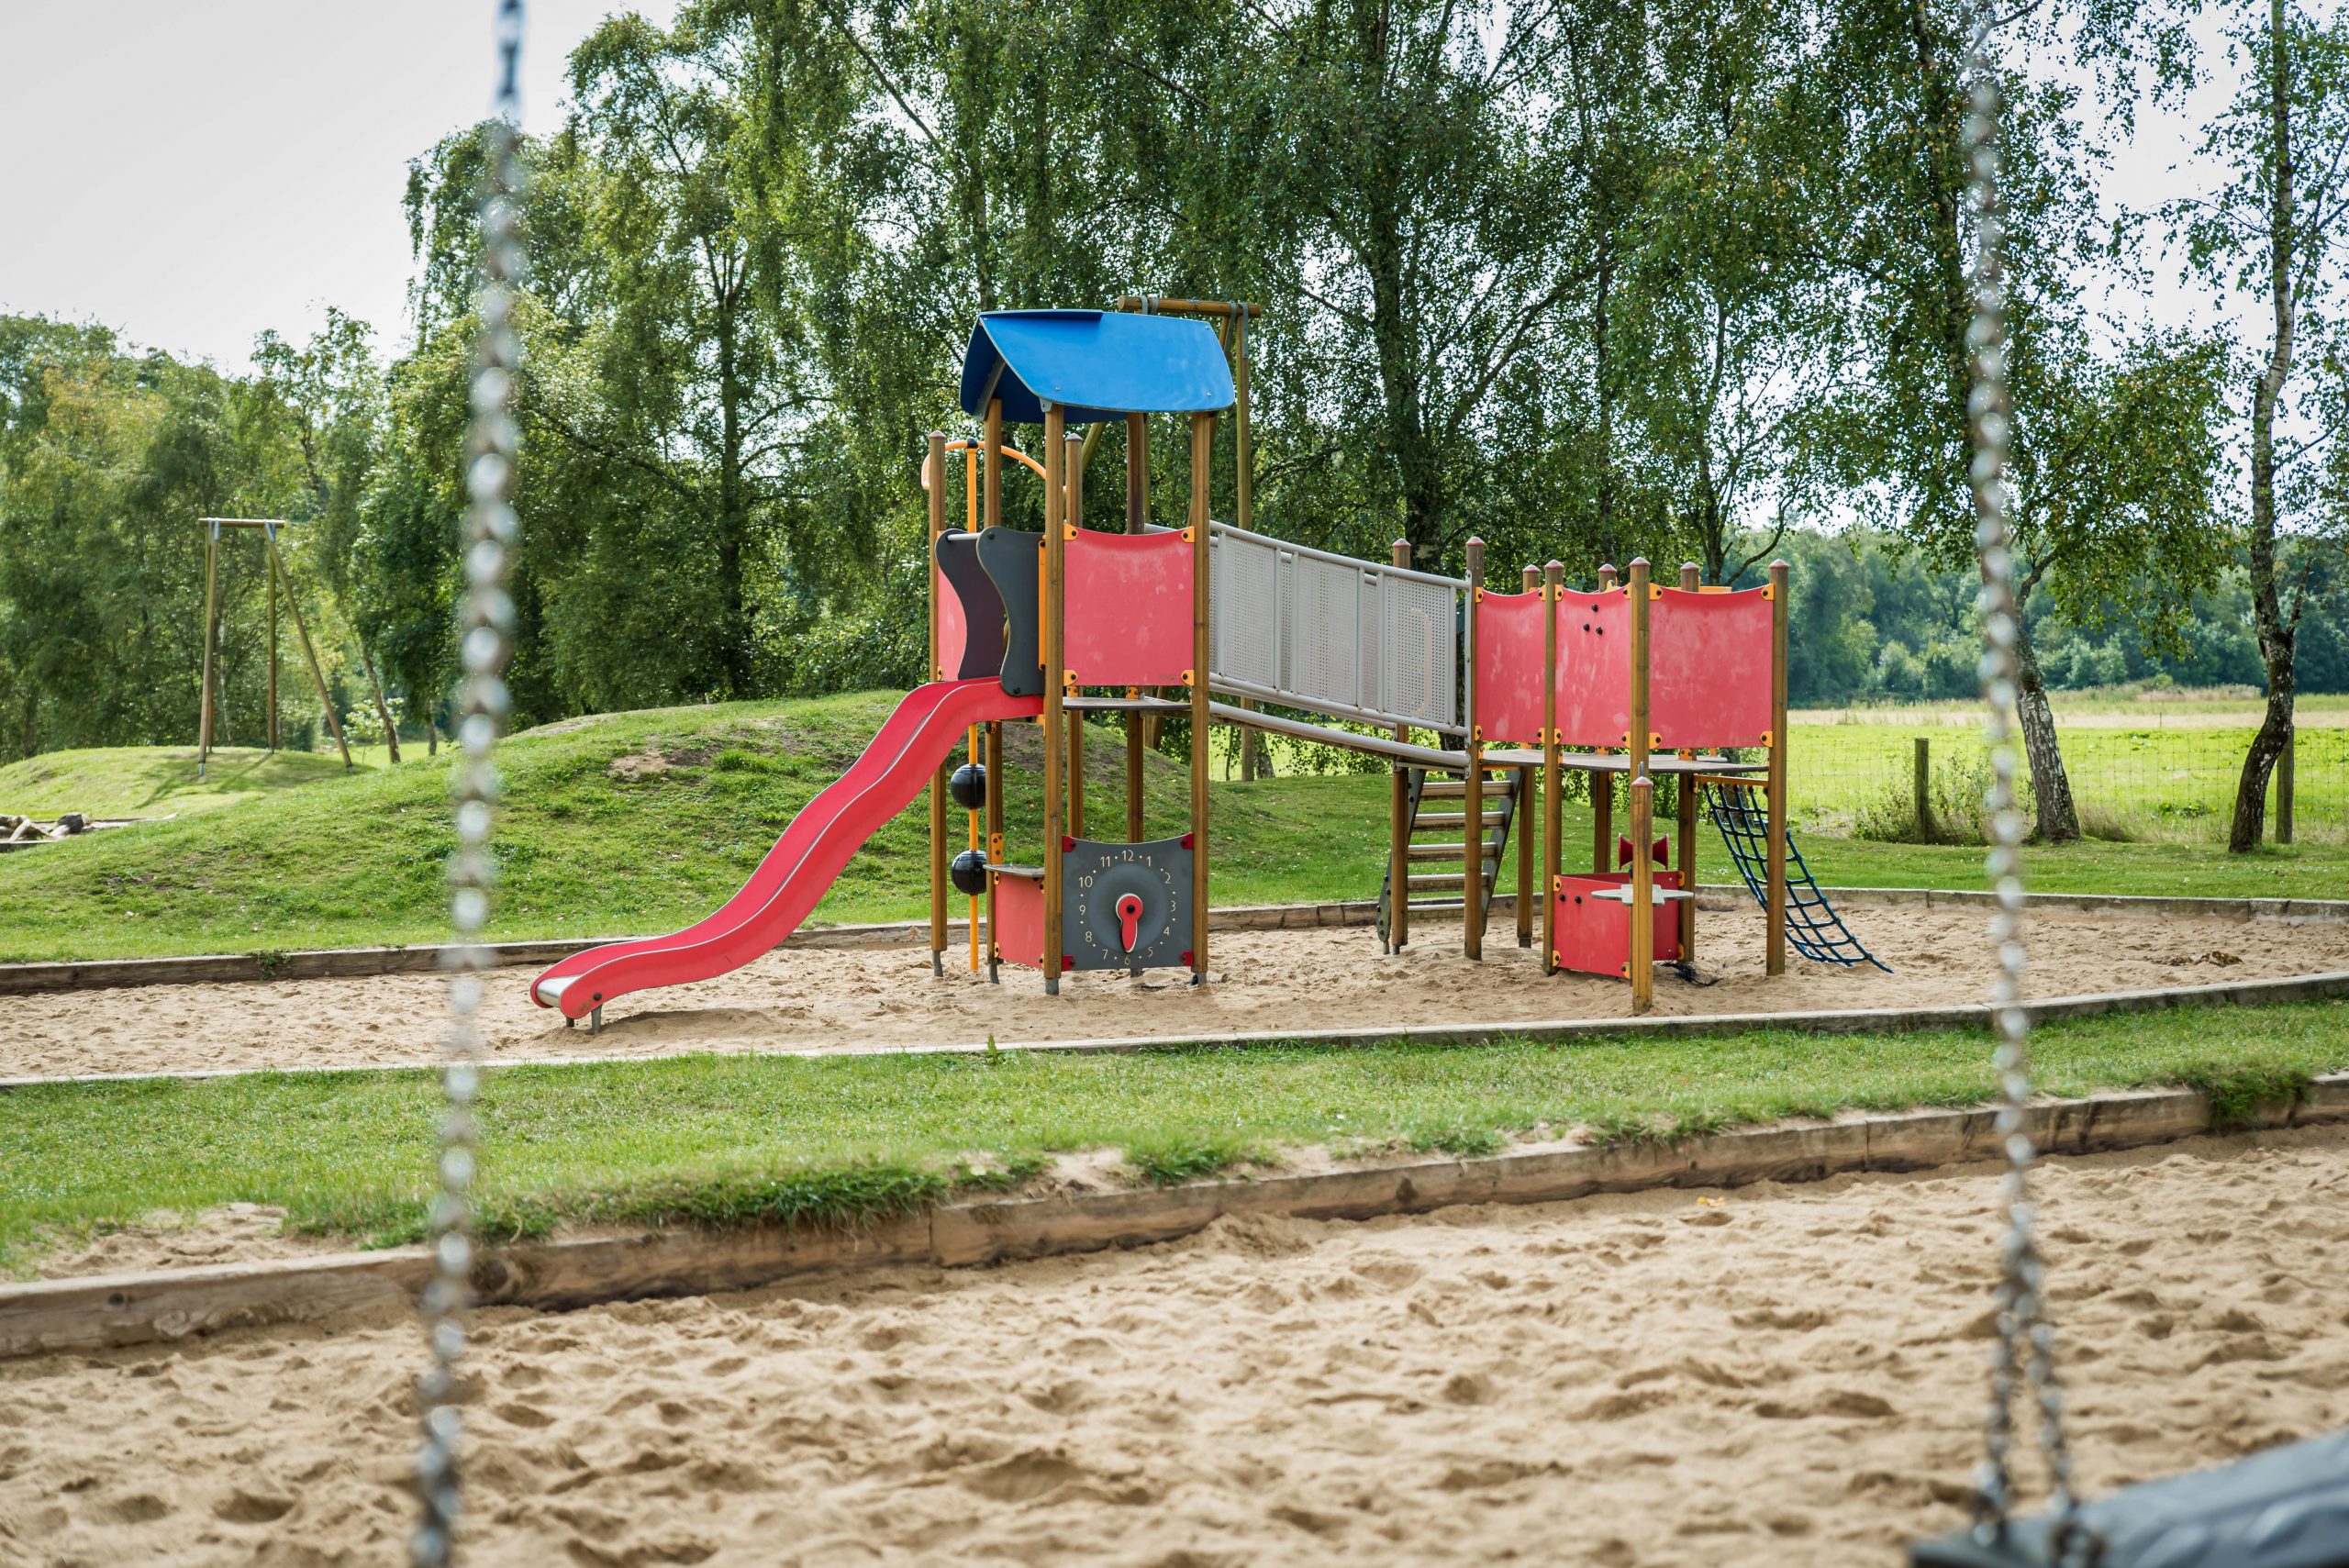 Outdoor playground set with slide, jungle gym, stairs and bridge